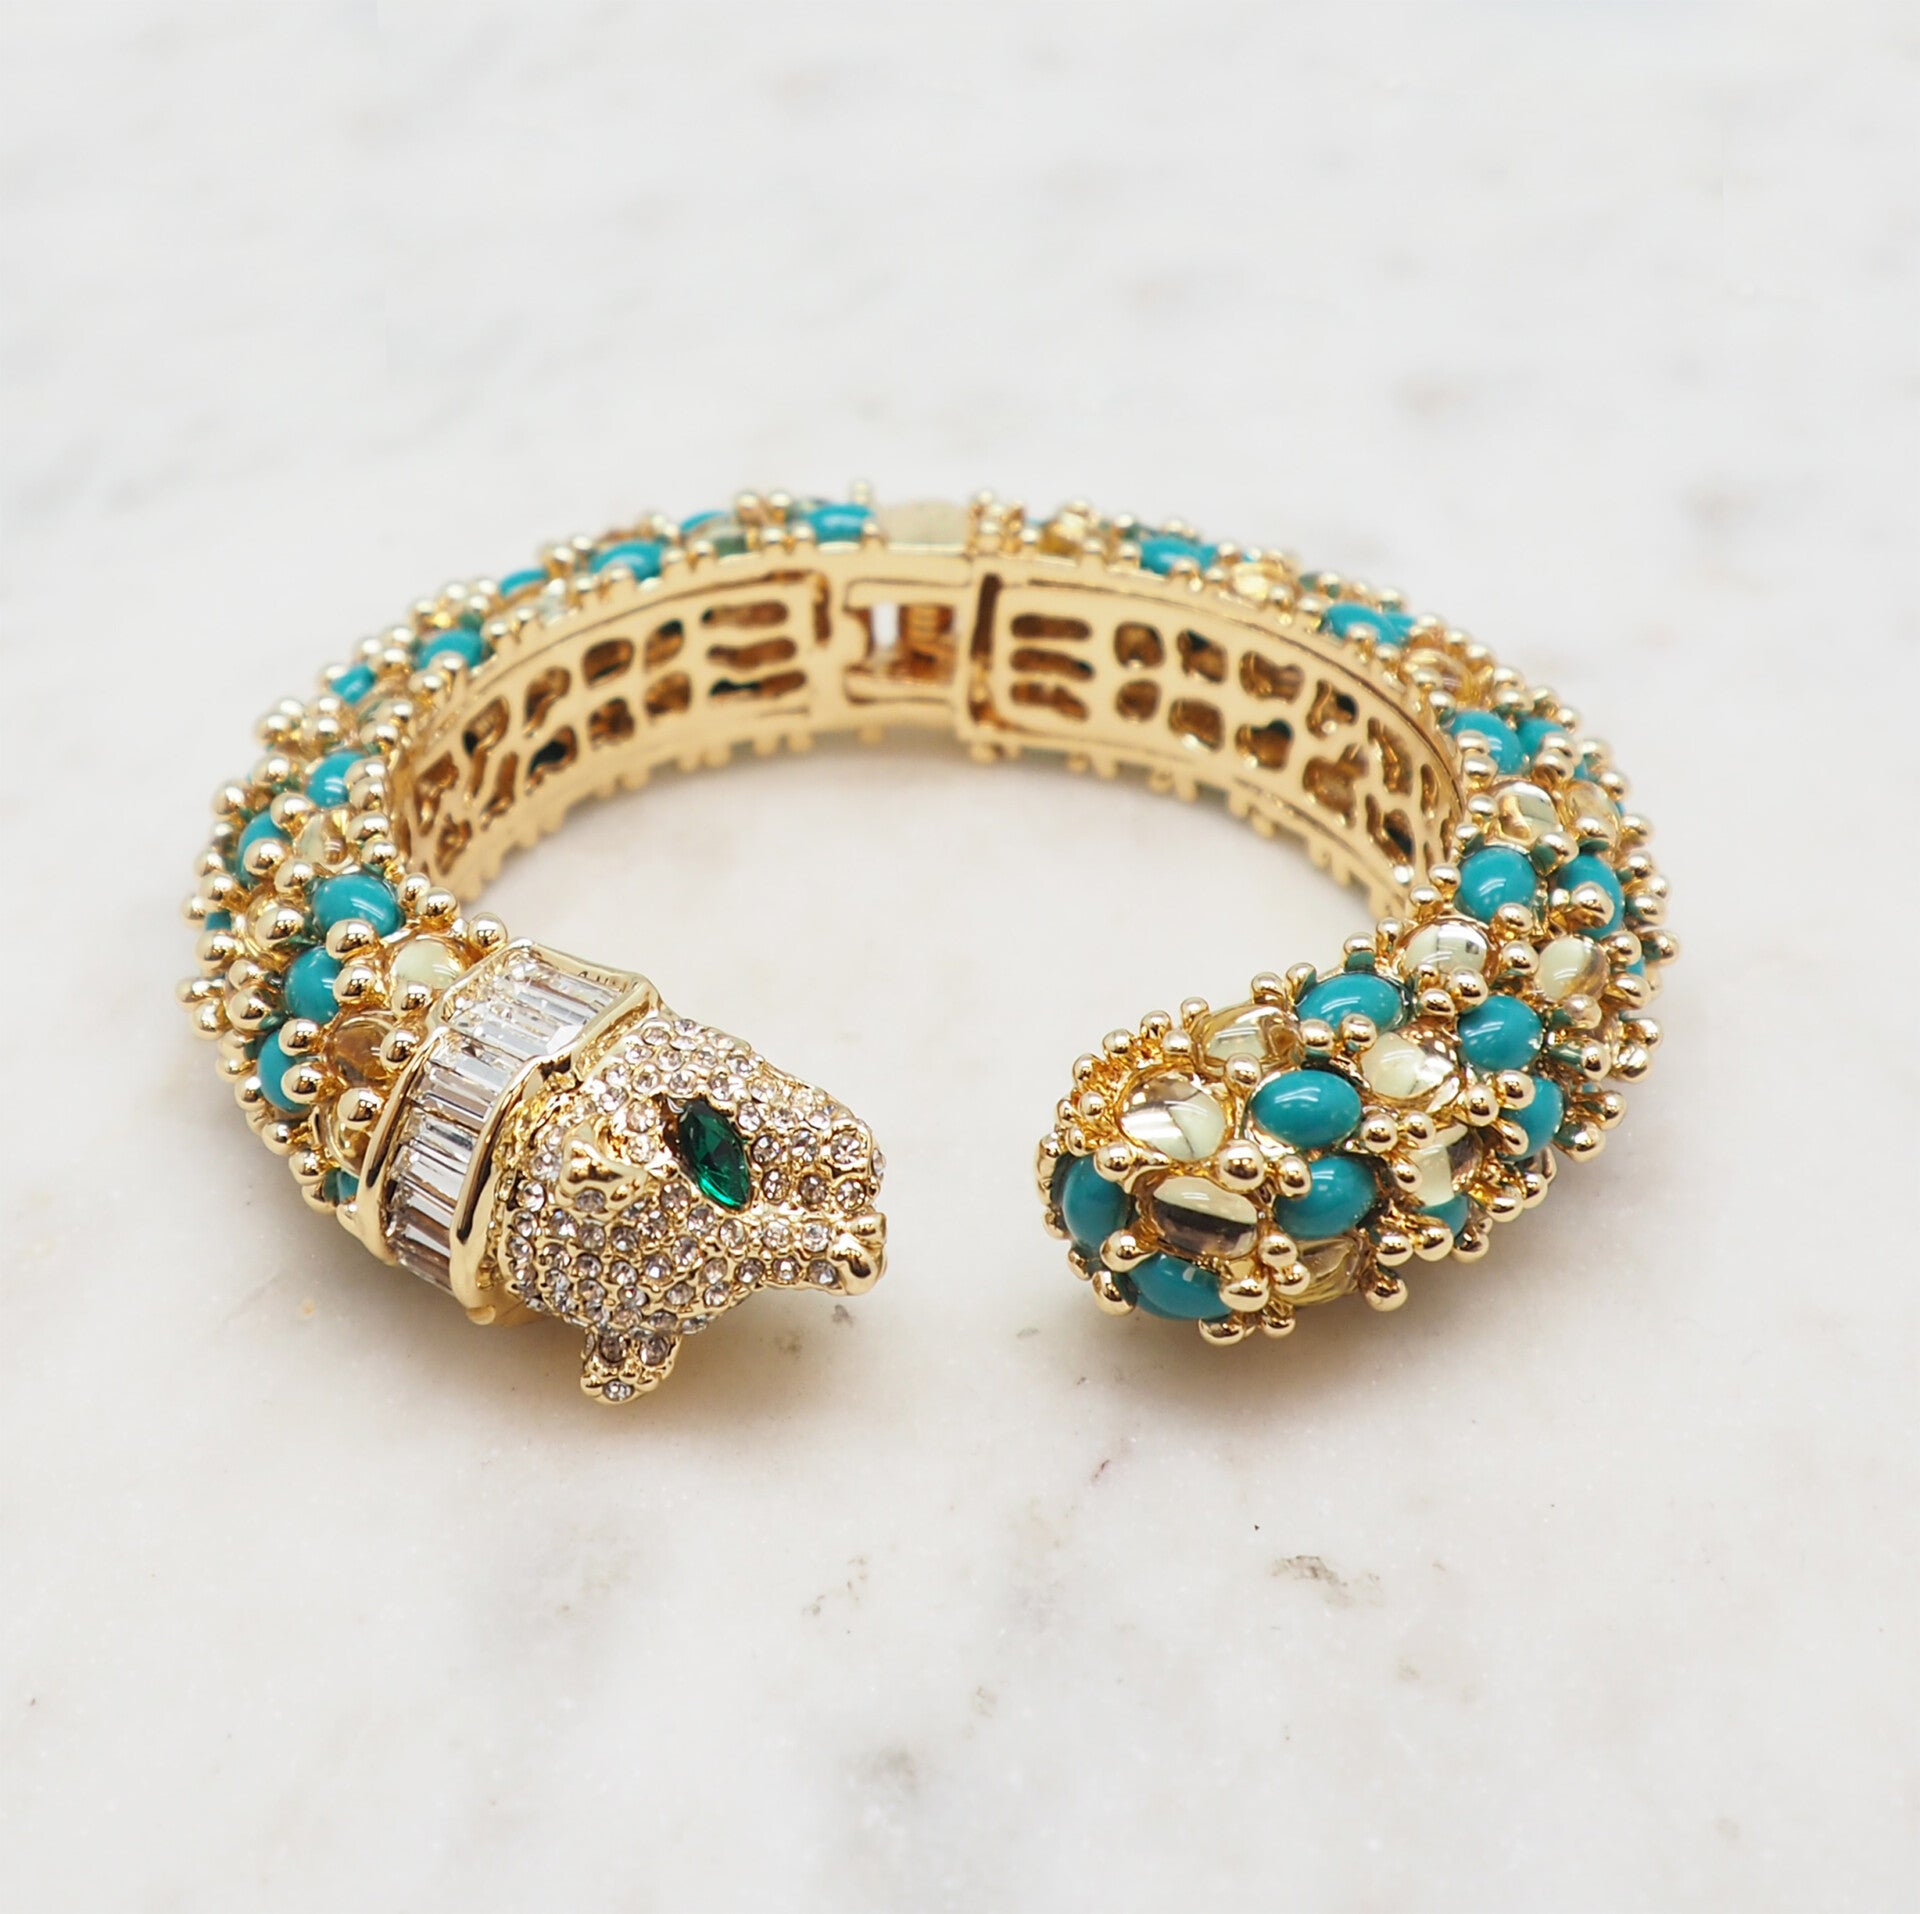 The Tiger Bangle - Blue and Gold